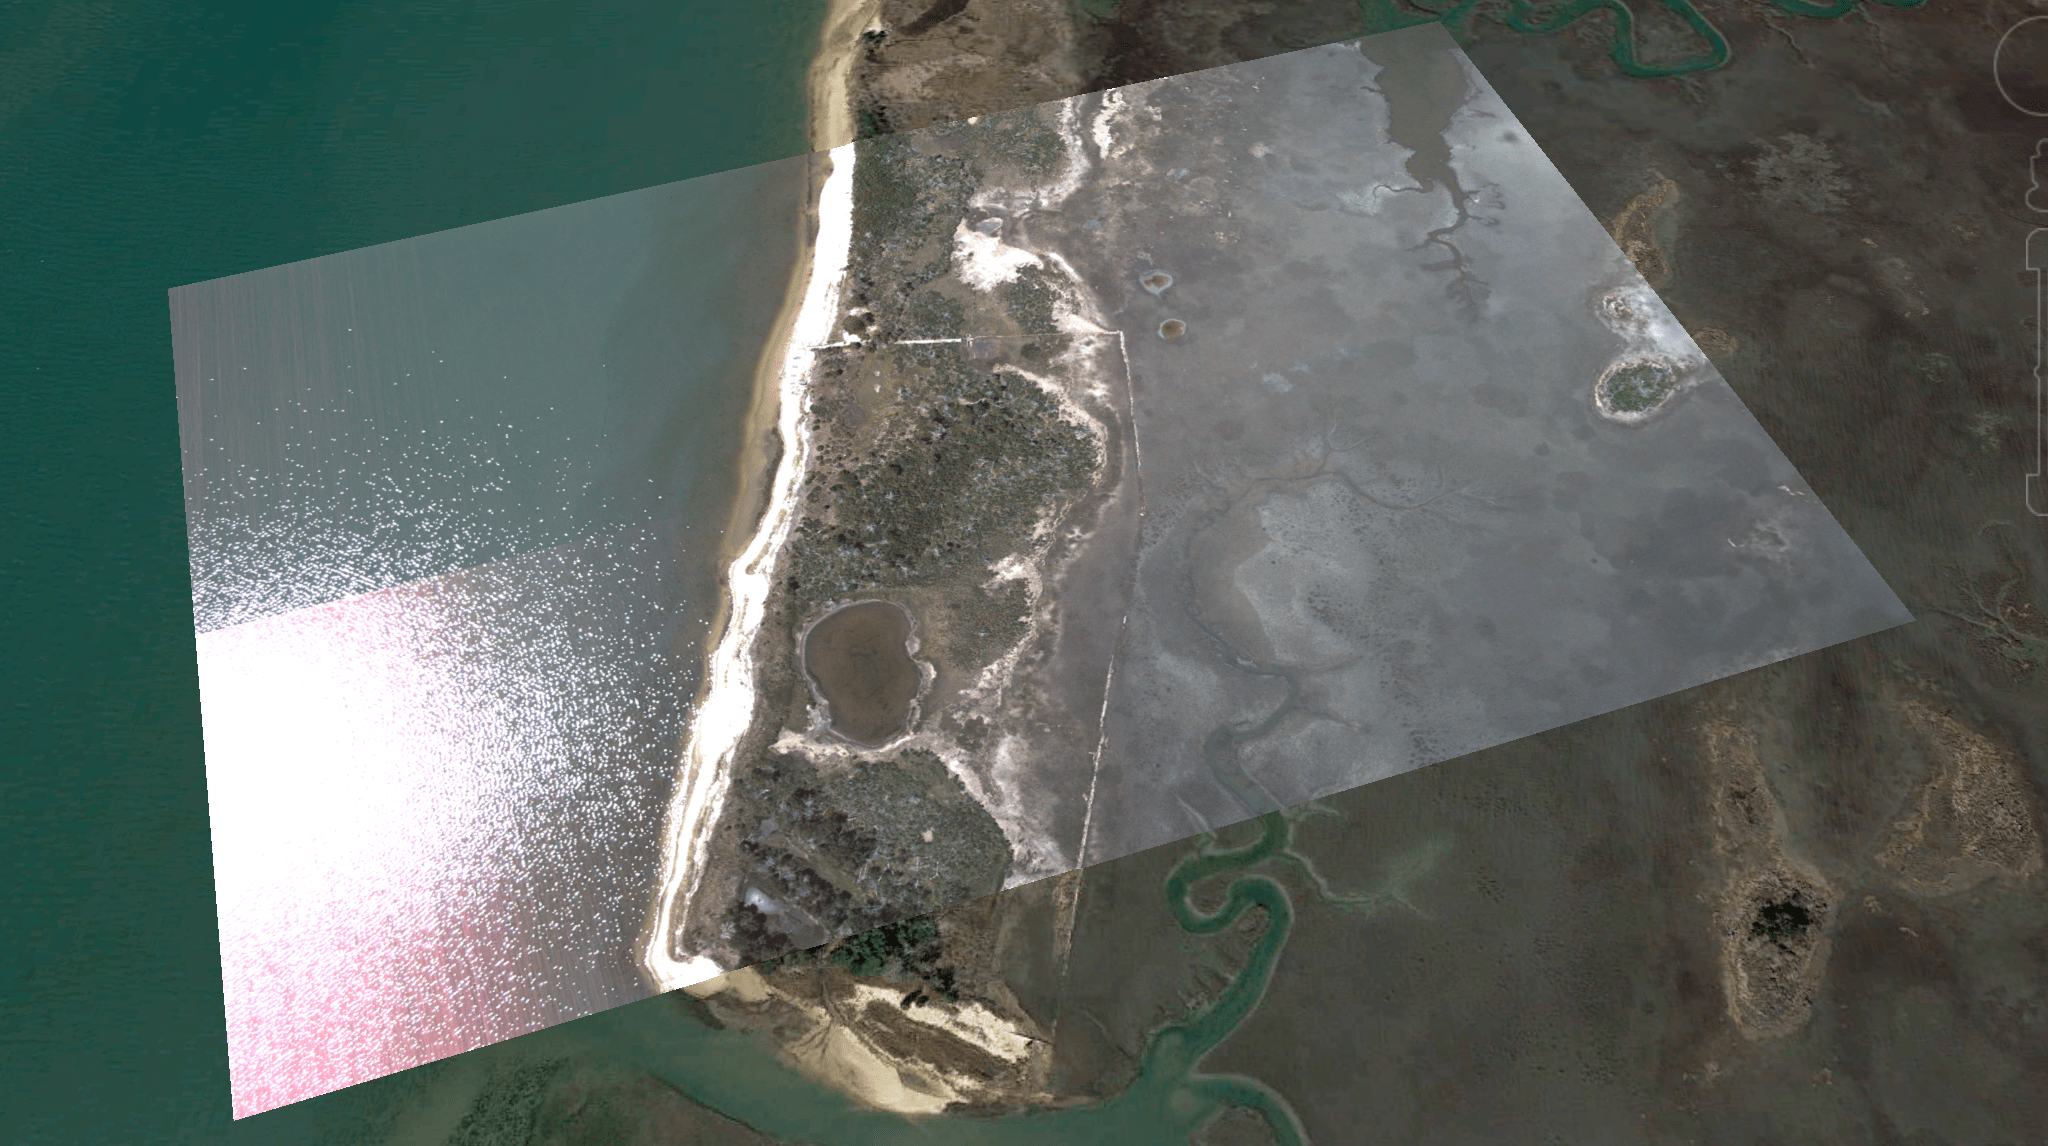 view of a marsh in visible light with satellite and areal views overlaid to train ai 'eye'